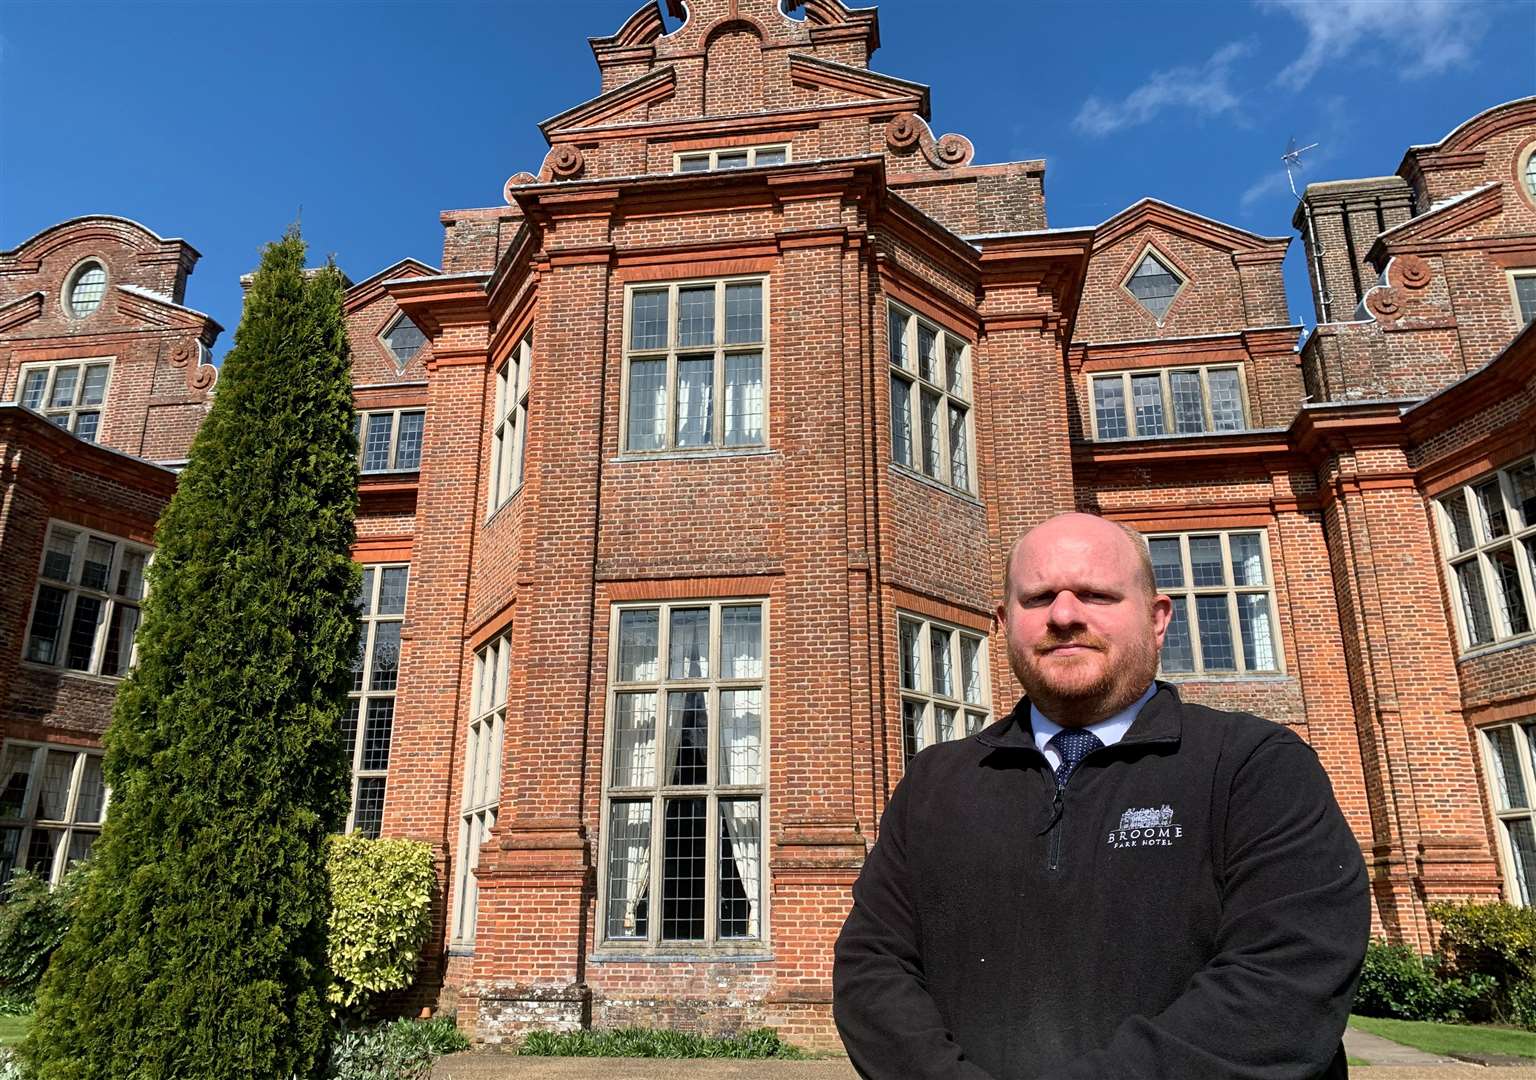 The general manager of Broome Park Hotel, Pete Farrow